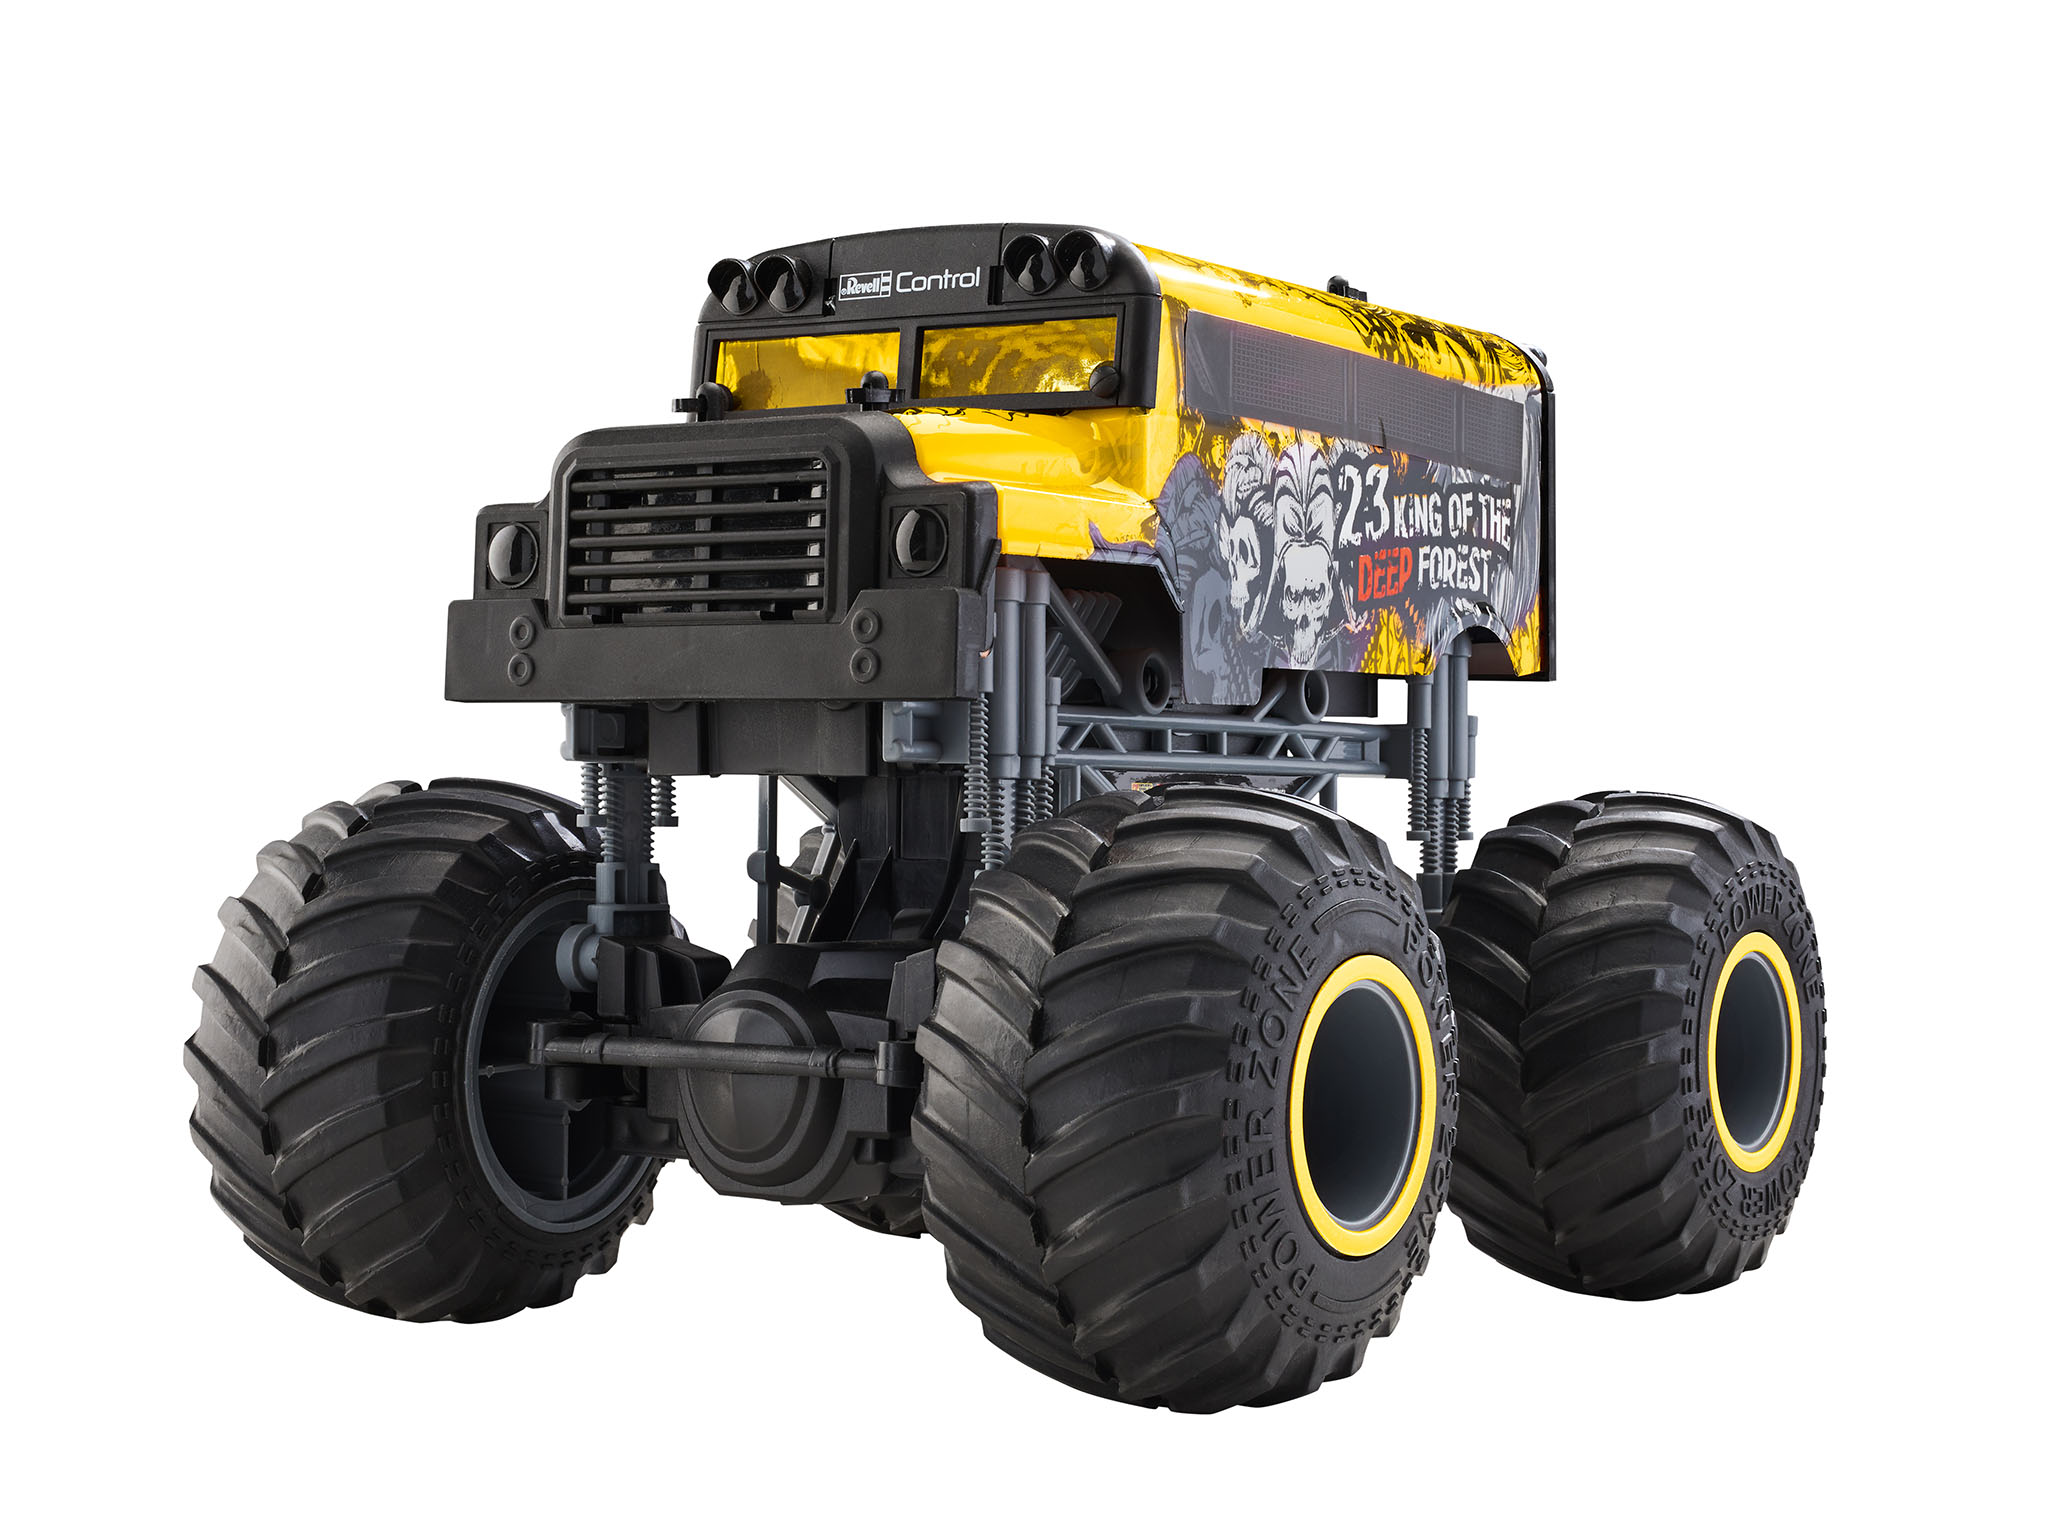 Revell Monster Truck "KING OF THE FOREST" afstandbestuurbare auto 2.4Ghz